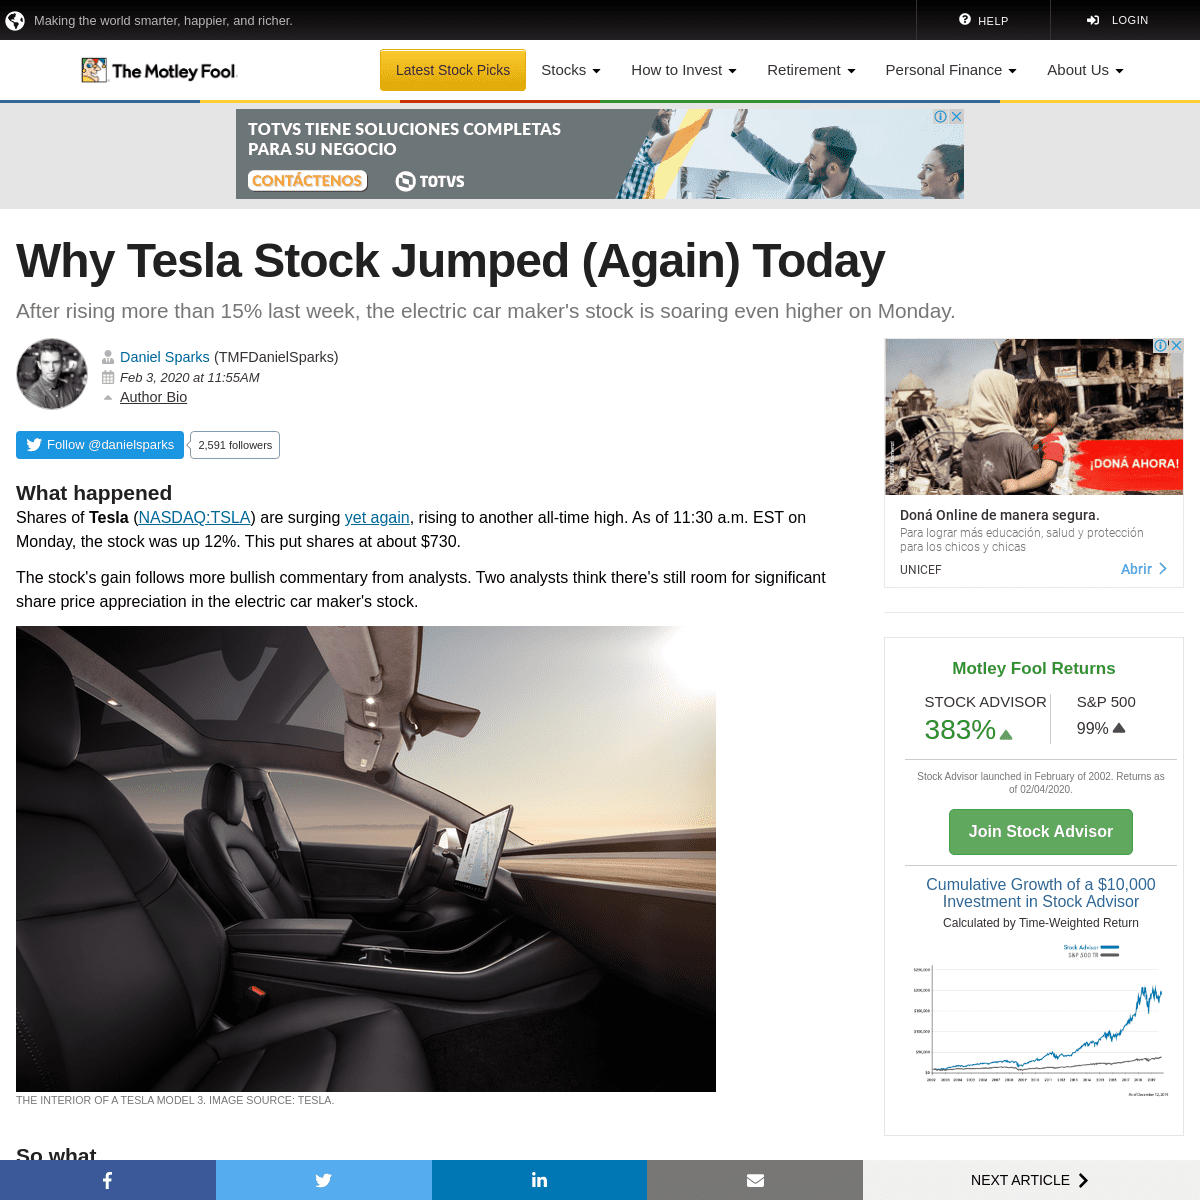 A complete backup of www.fool.com/investing/2020/02/03/why-tesla-stock-jumped-again-today.aspx